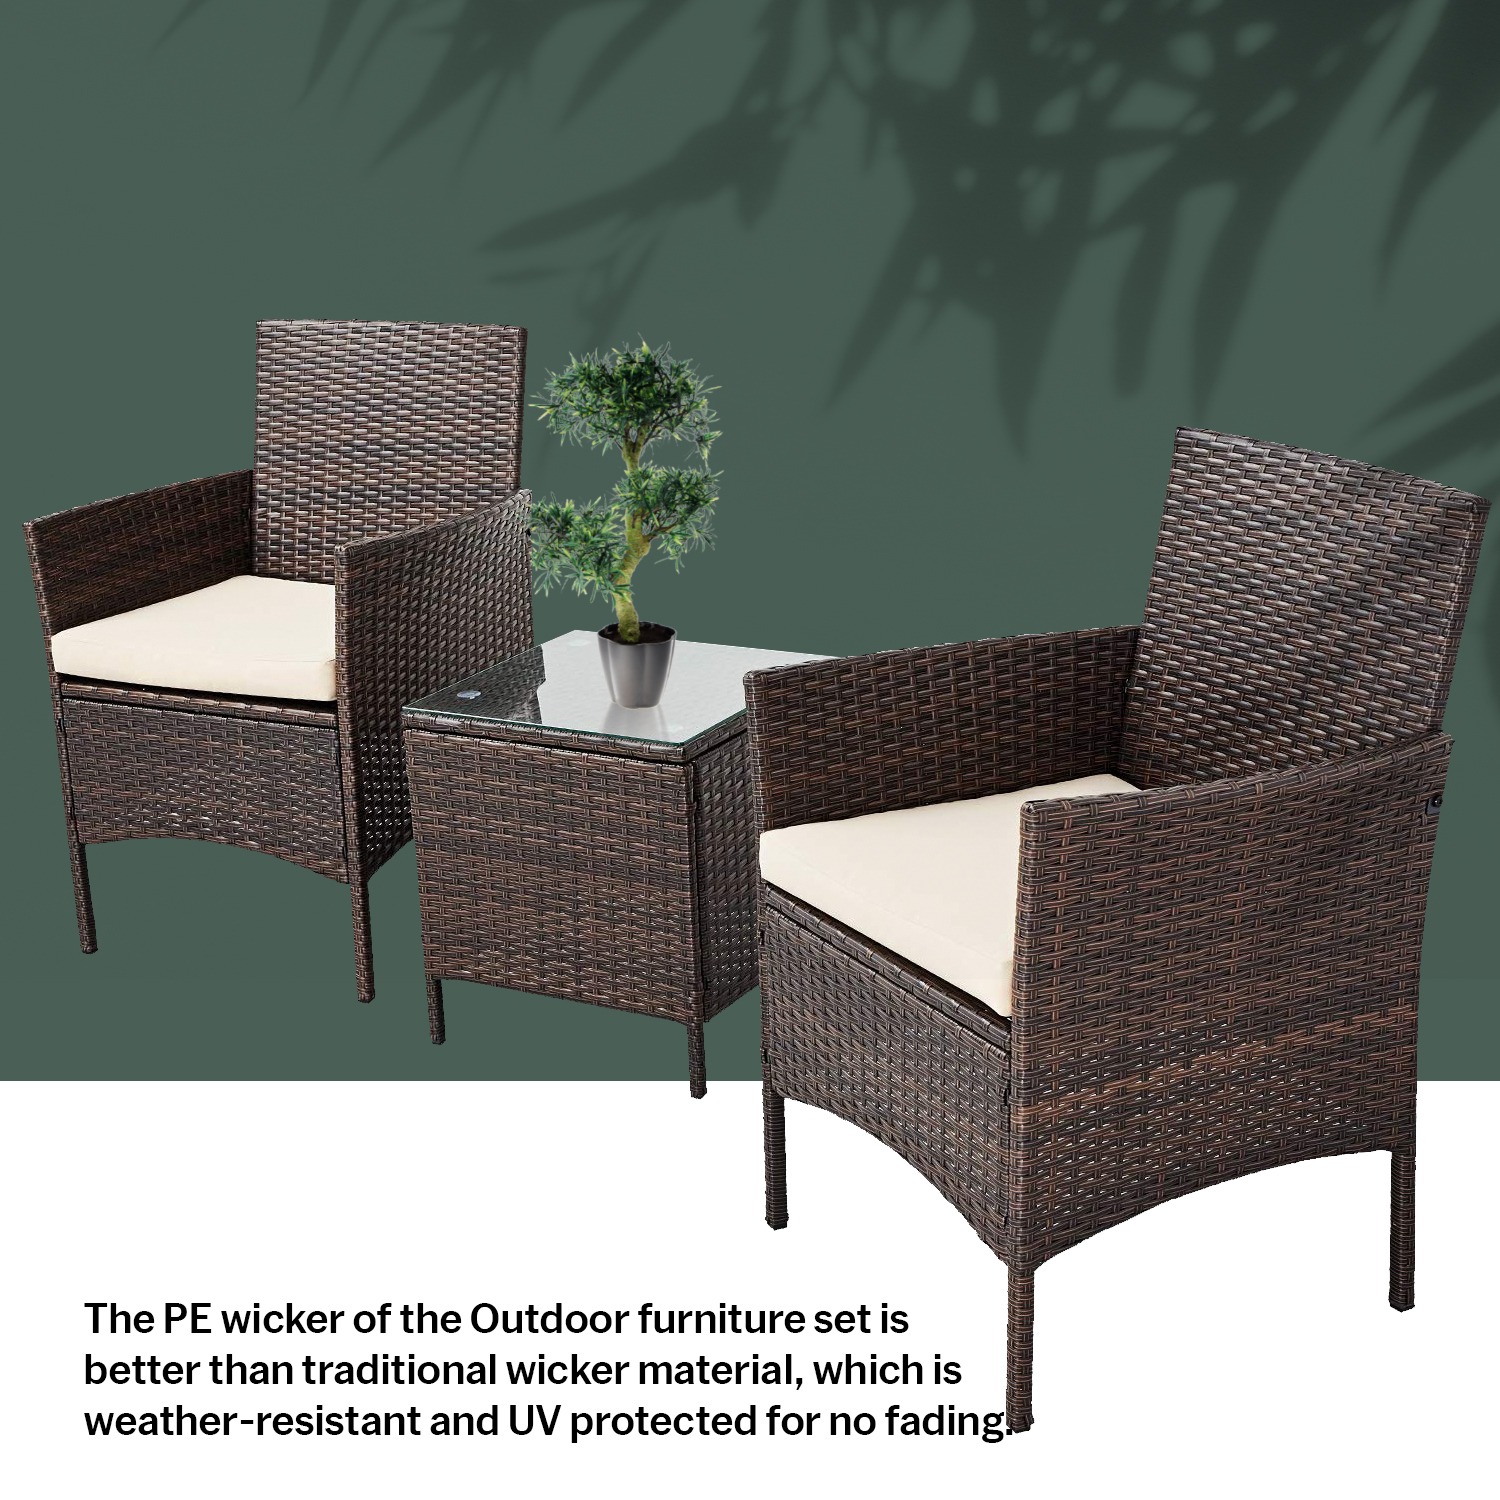 Canaan 3 Piece Patio Rattan Furniture Set – 2 Relaxing Cushion Chairs With a Cafe Table - Beige - image 3 of 10